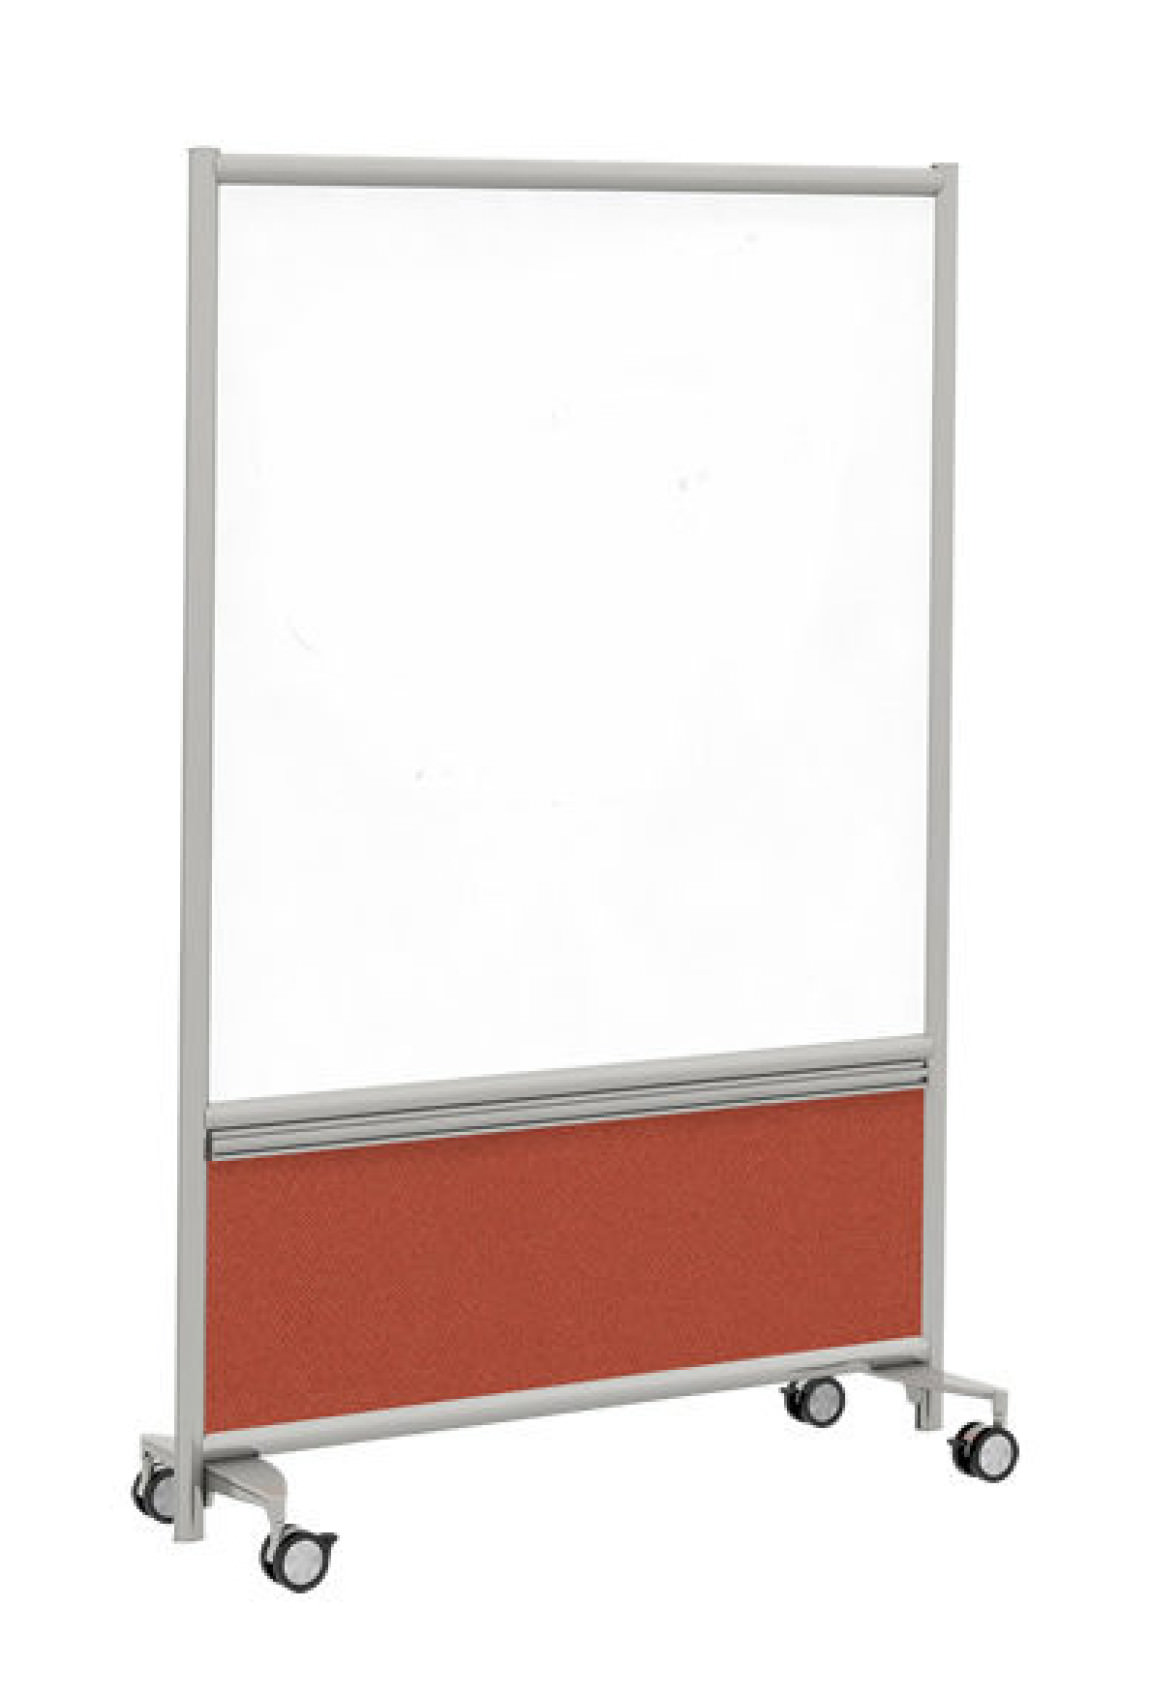 Mobile Double Sided Dry Erase Whiteboard : 3SL-3754-AA-4-WB